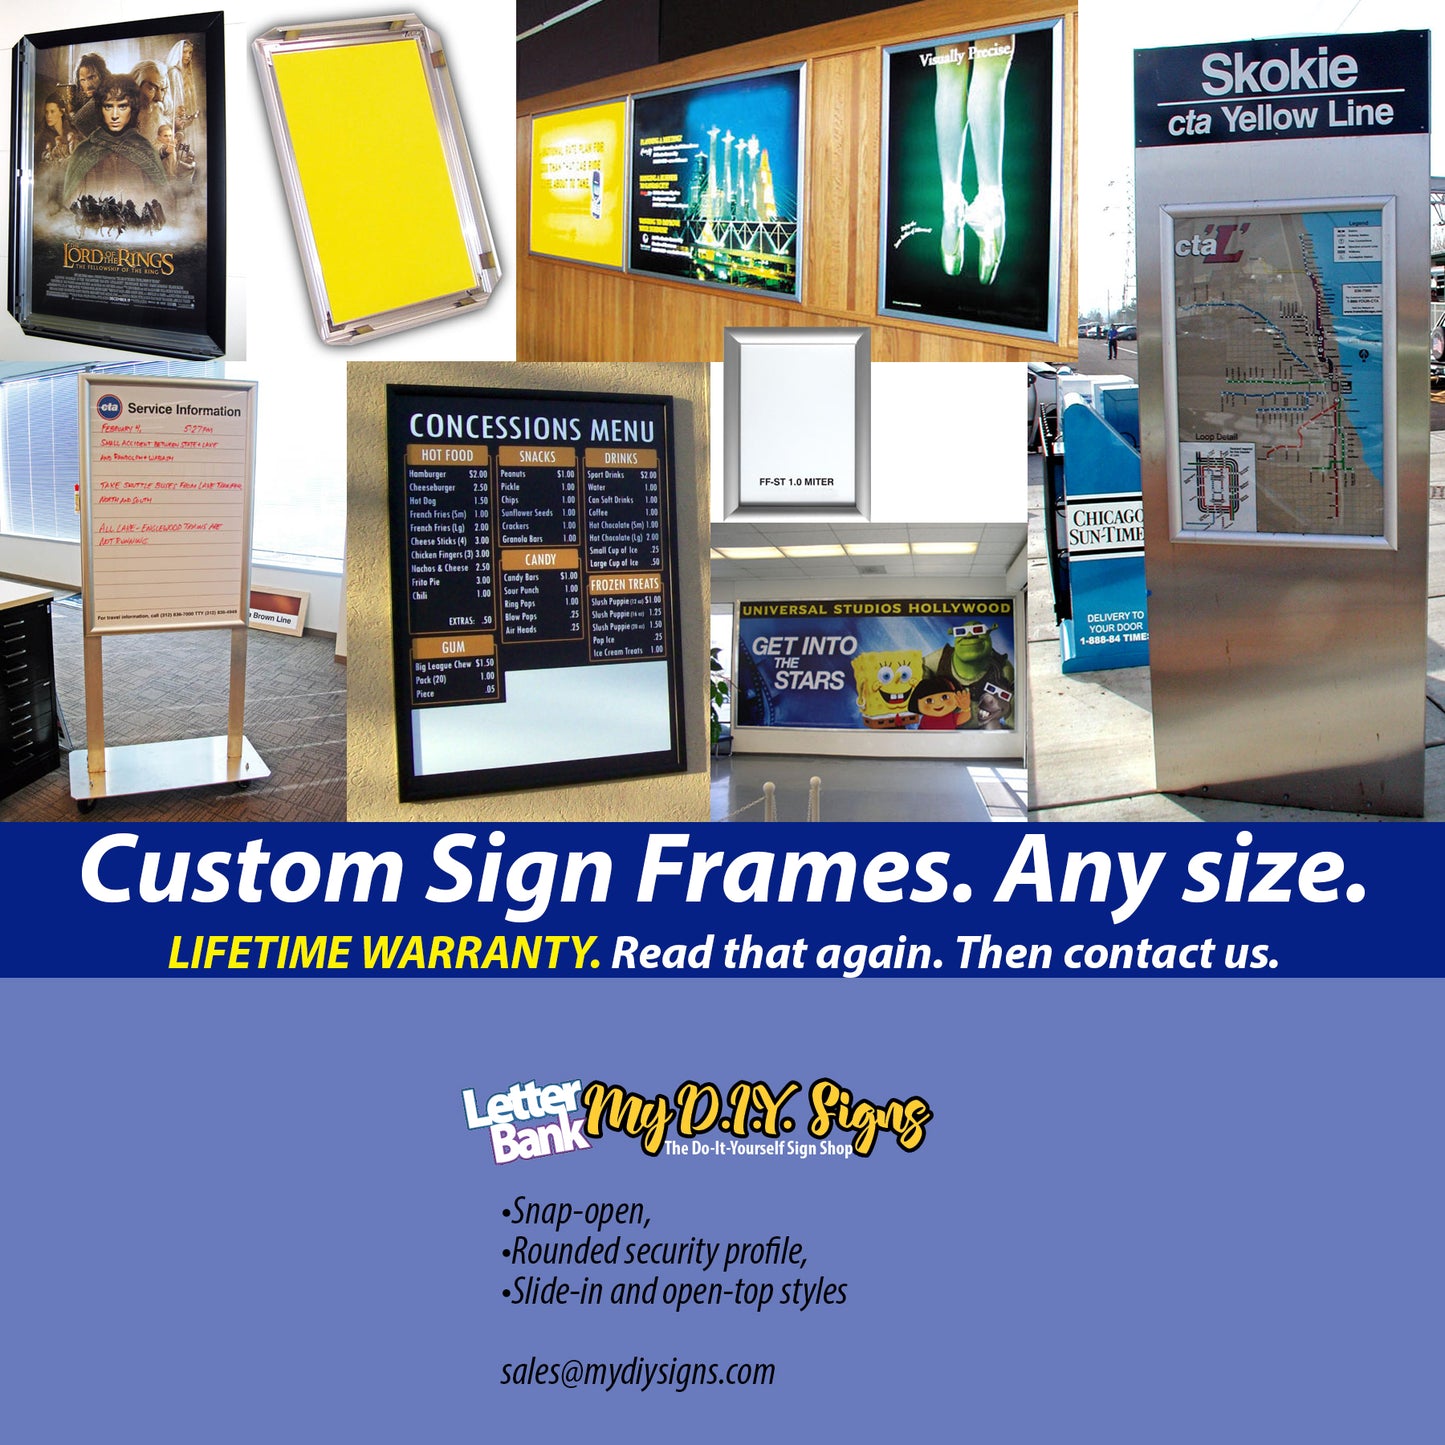 Print Ad 1.25" Snap-Open Frame; ONE AND TWO FRAMES